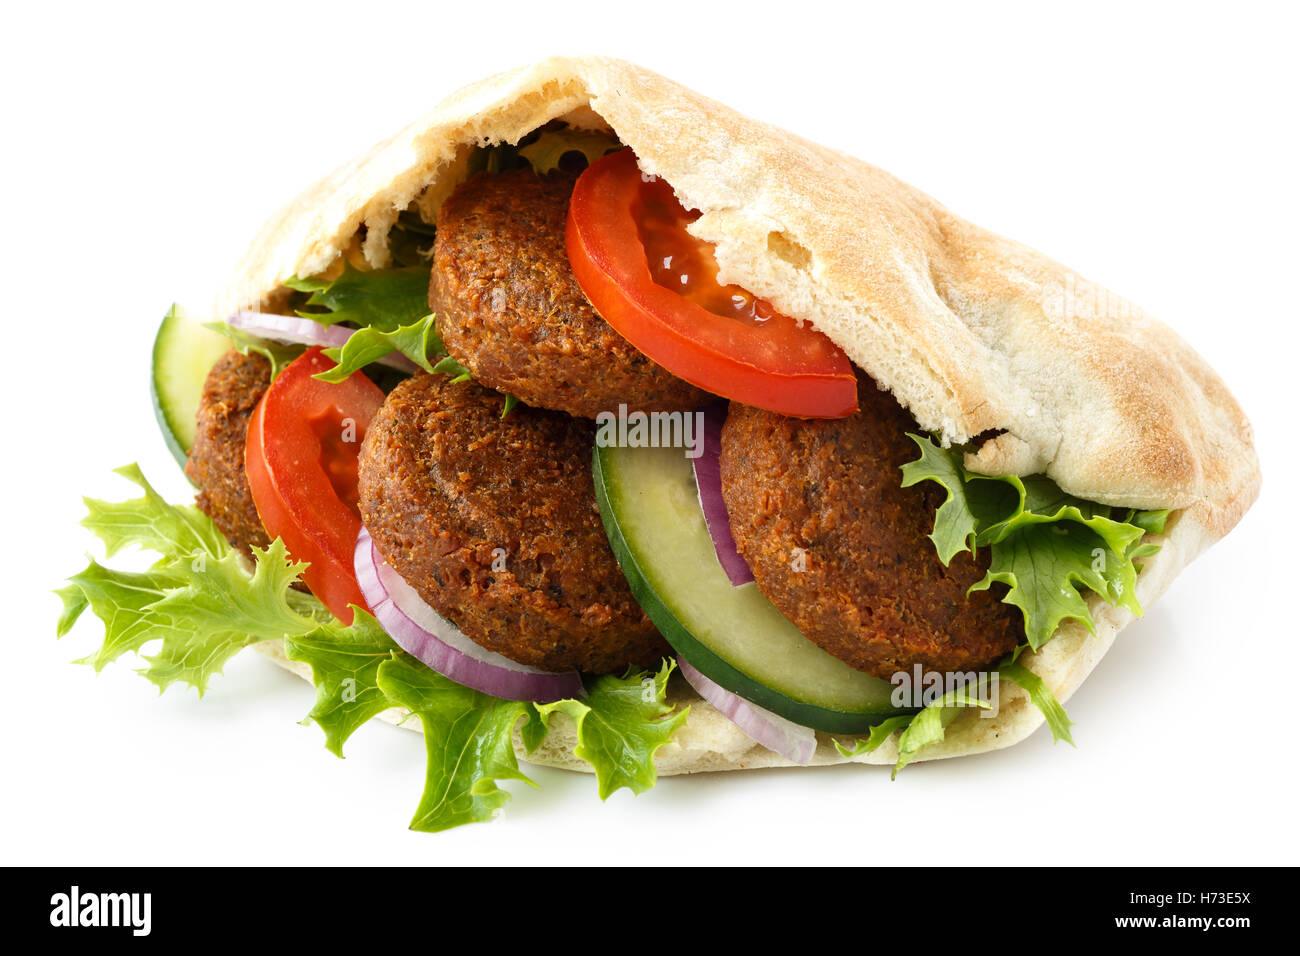 Pita bread filled with falafel and salad isolated on white. Stock Photo